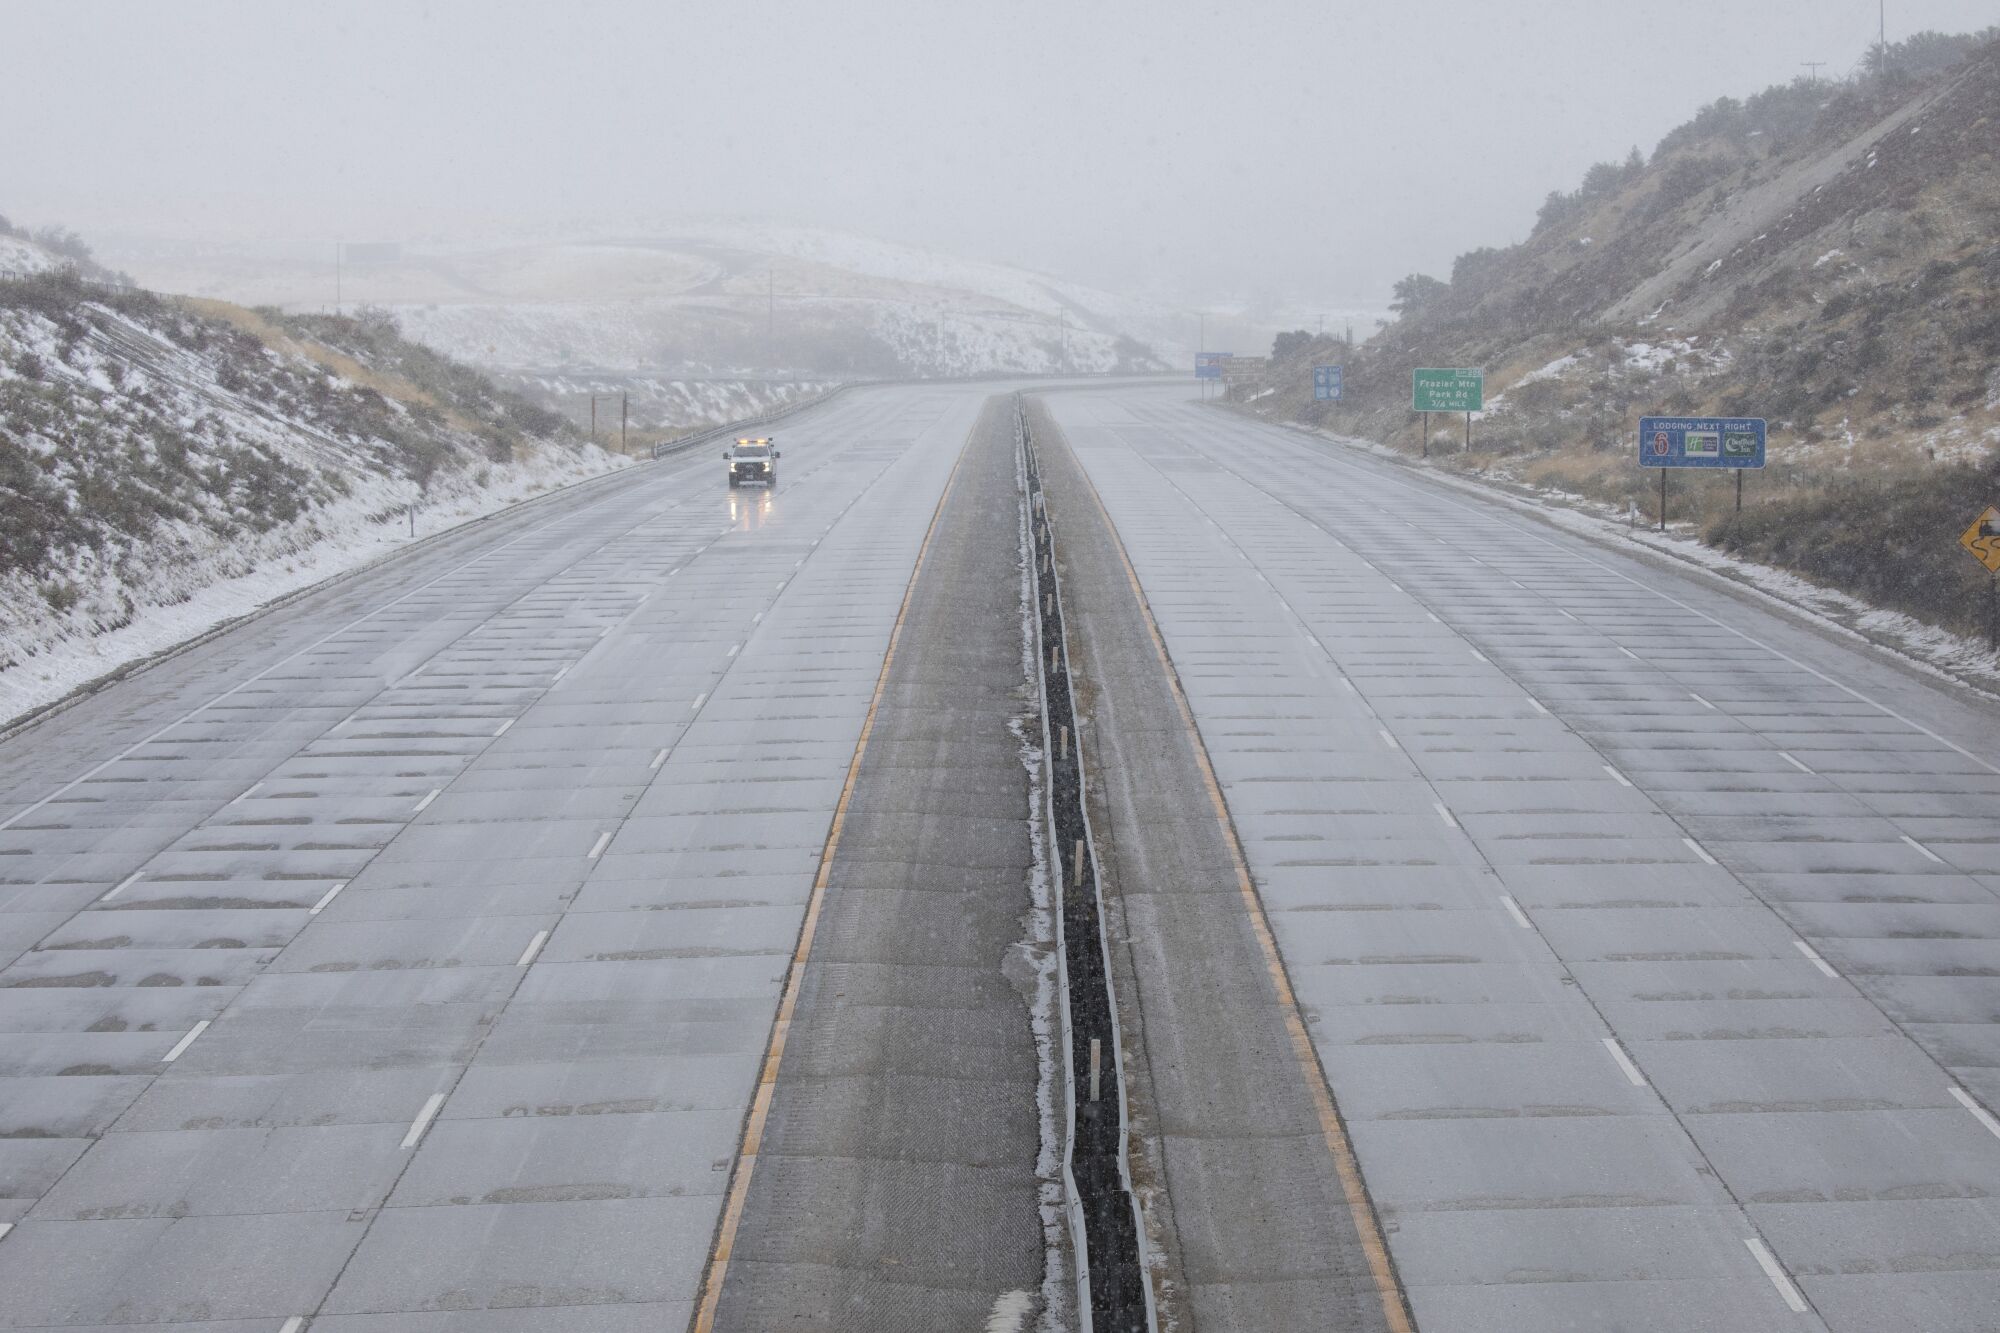 A Caltrans vehicle drives on an empty stretch of the 5 Freeway through Gorman as a series of winter storms hit California.